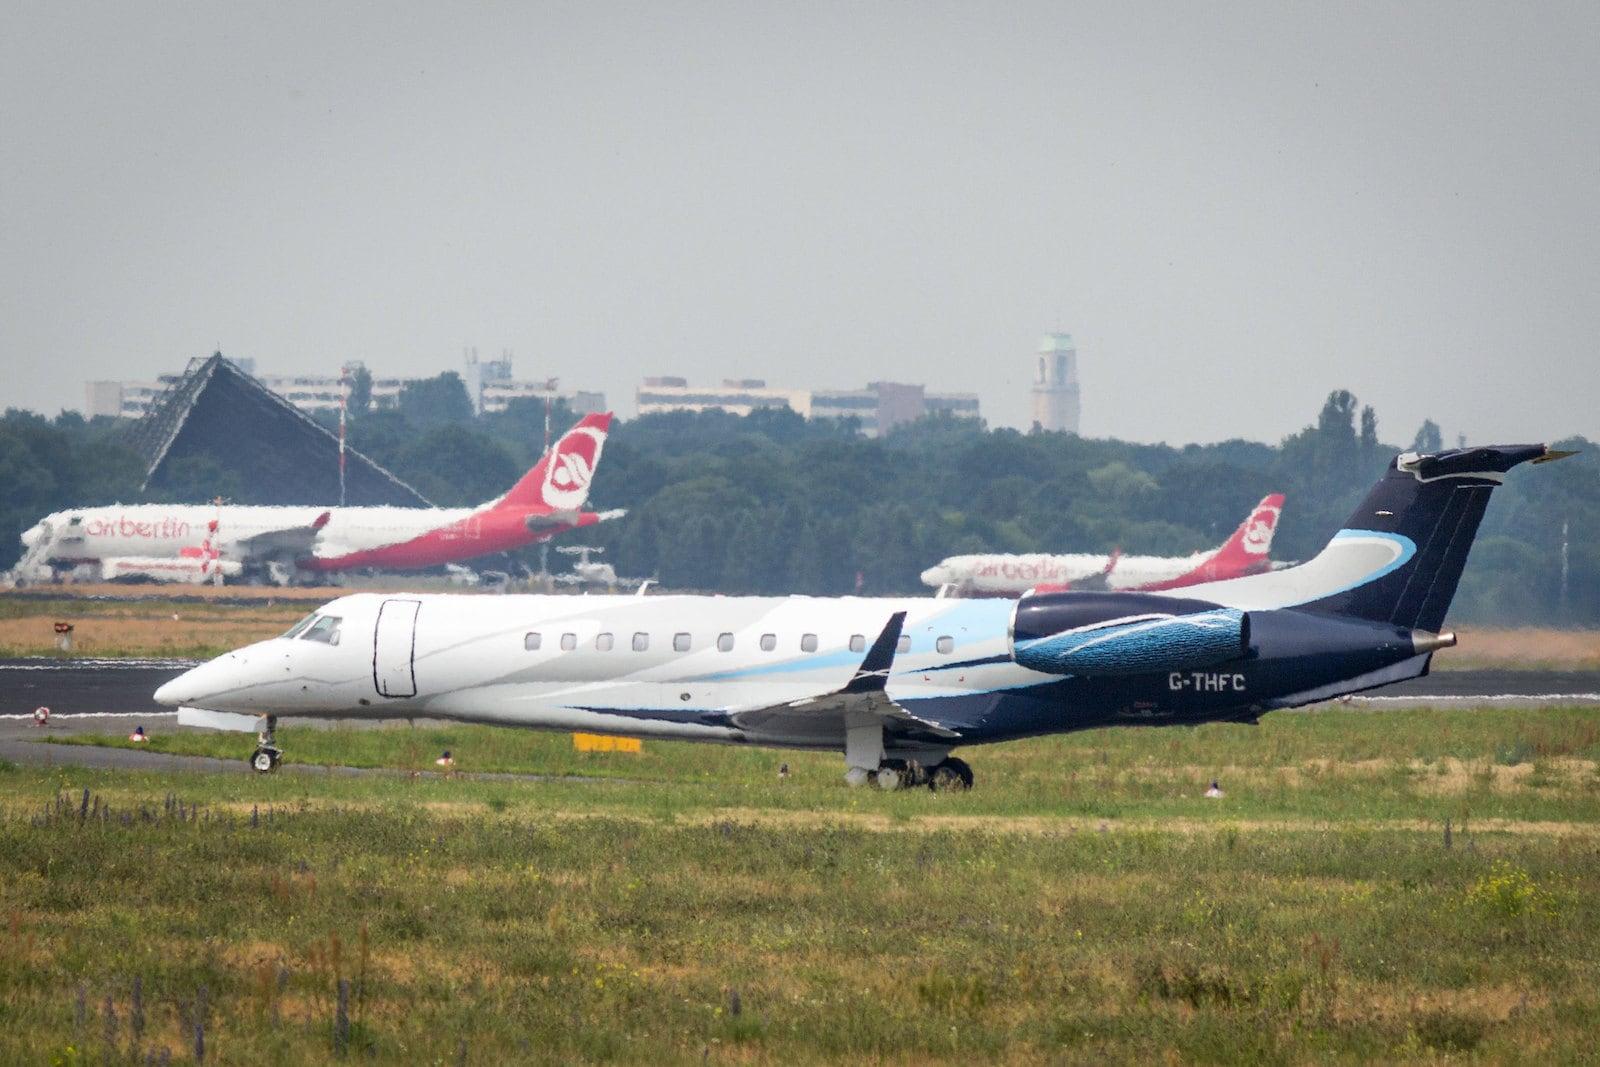 A private jet in front of two parked Air Berlin commercial airliners.